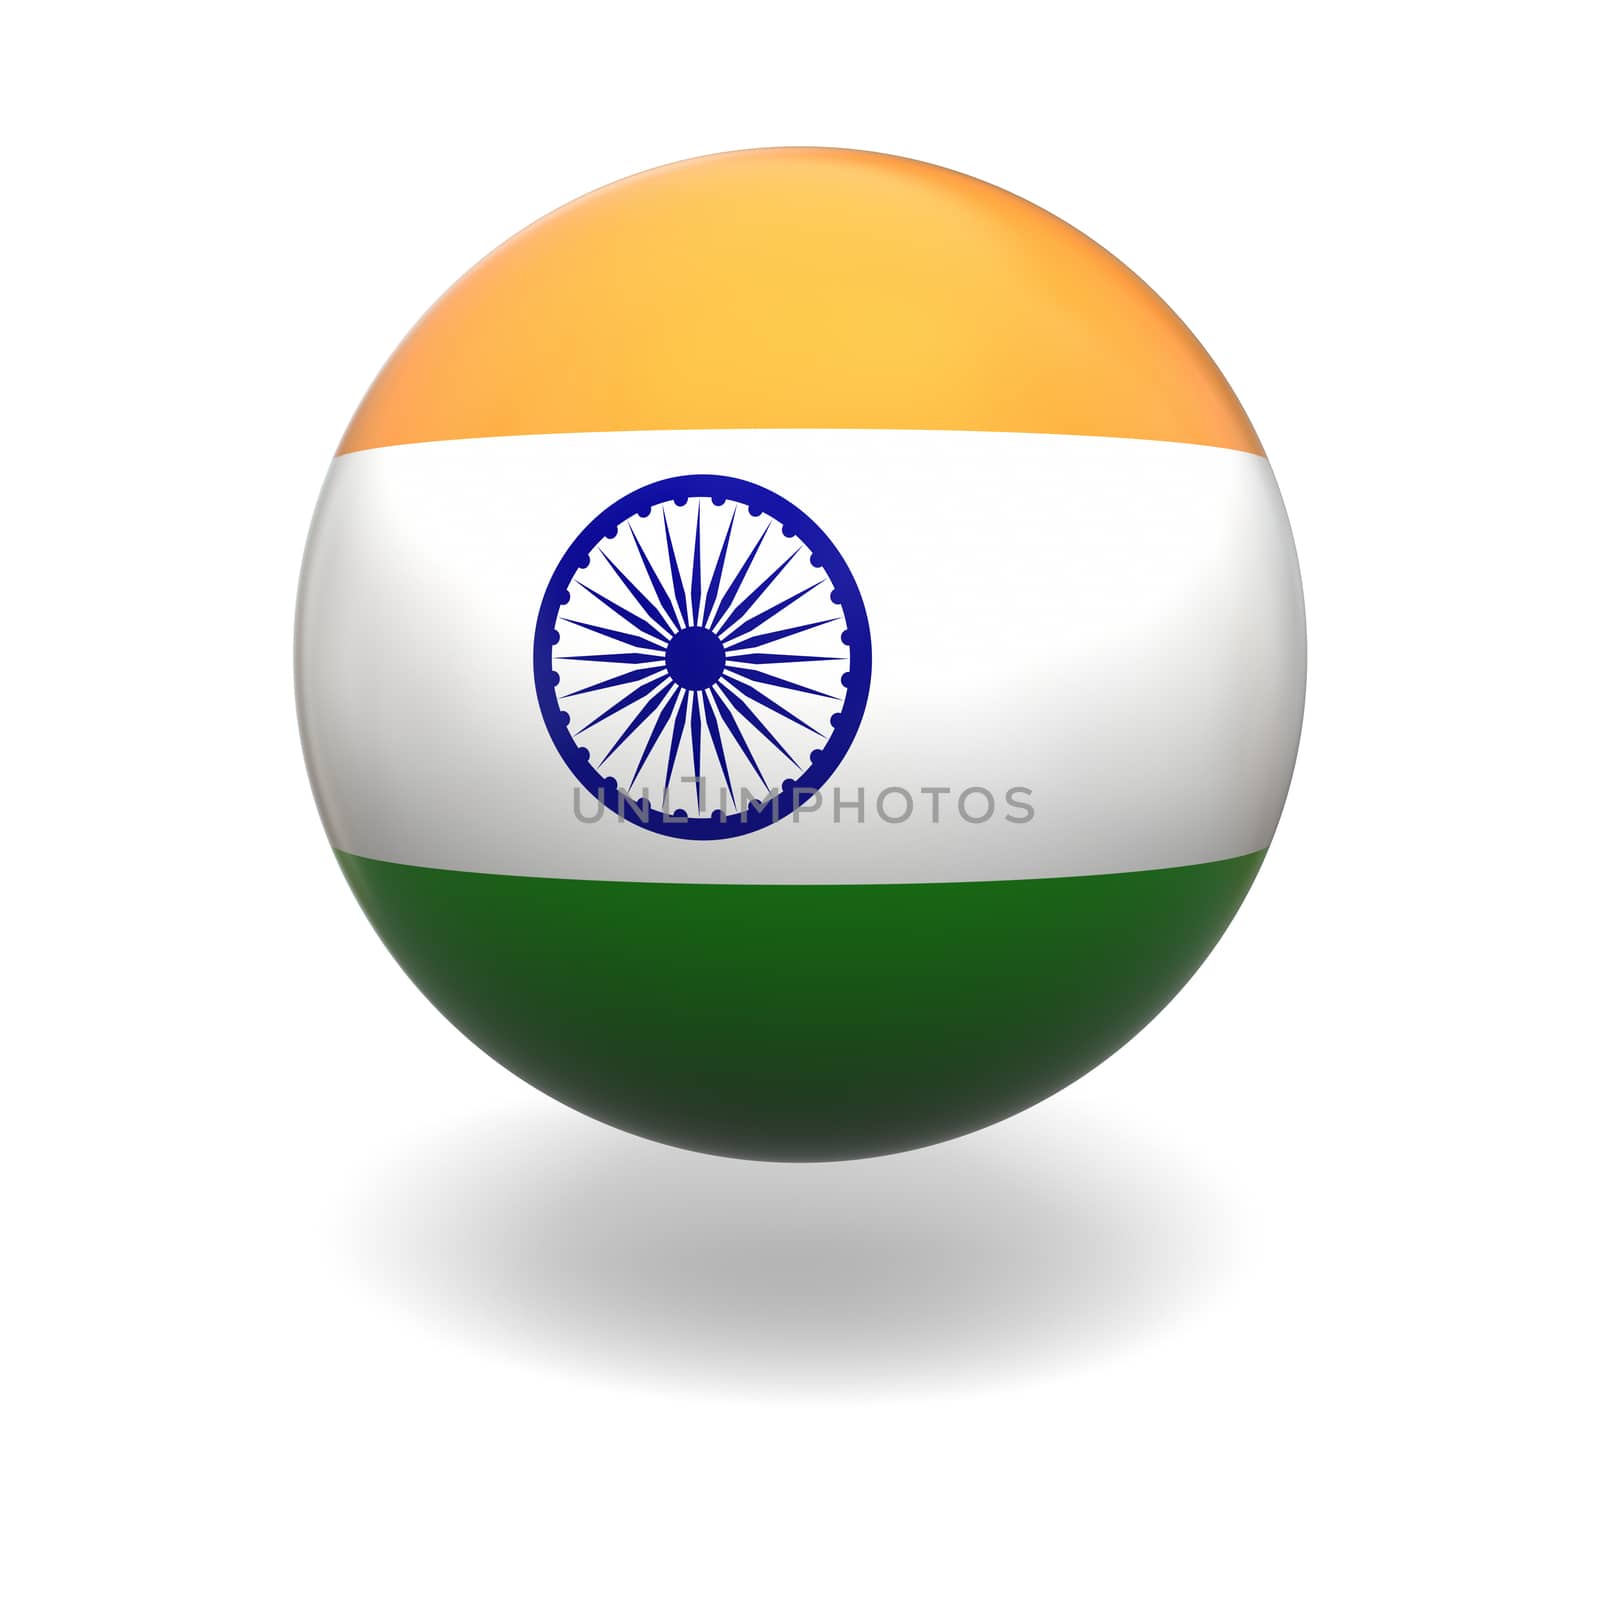 National flag of India on sphere isolated on white background